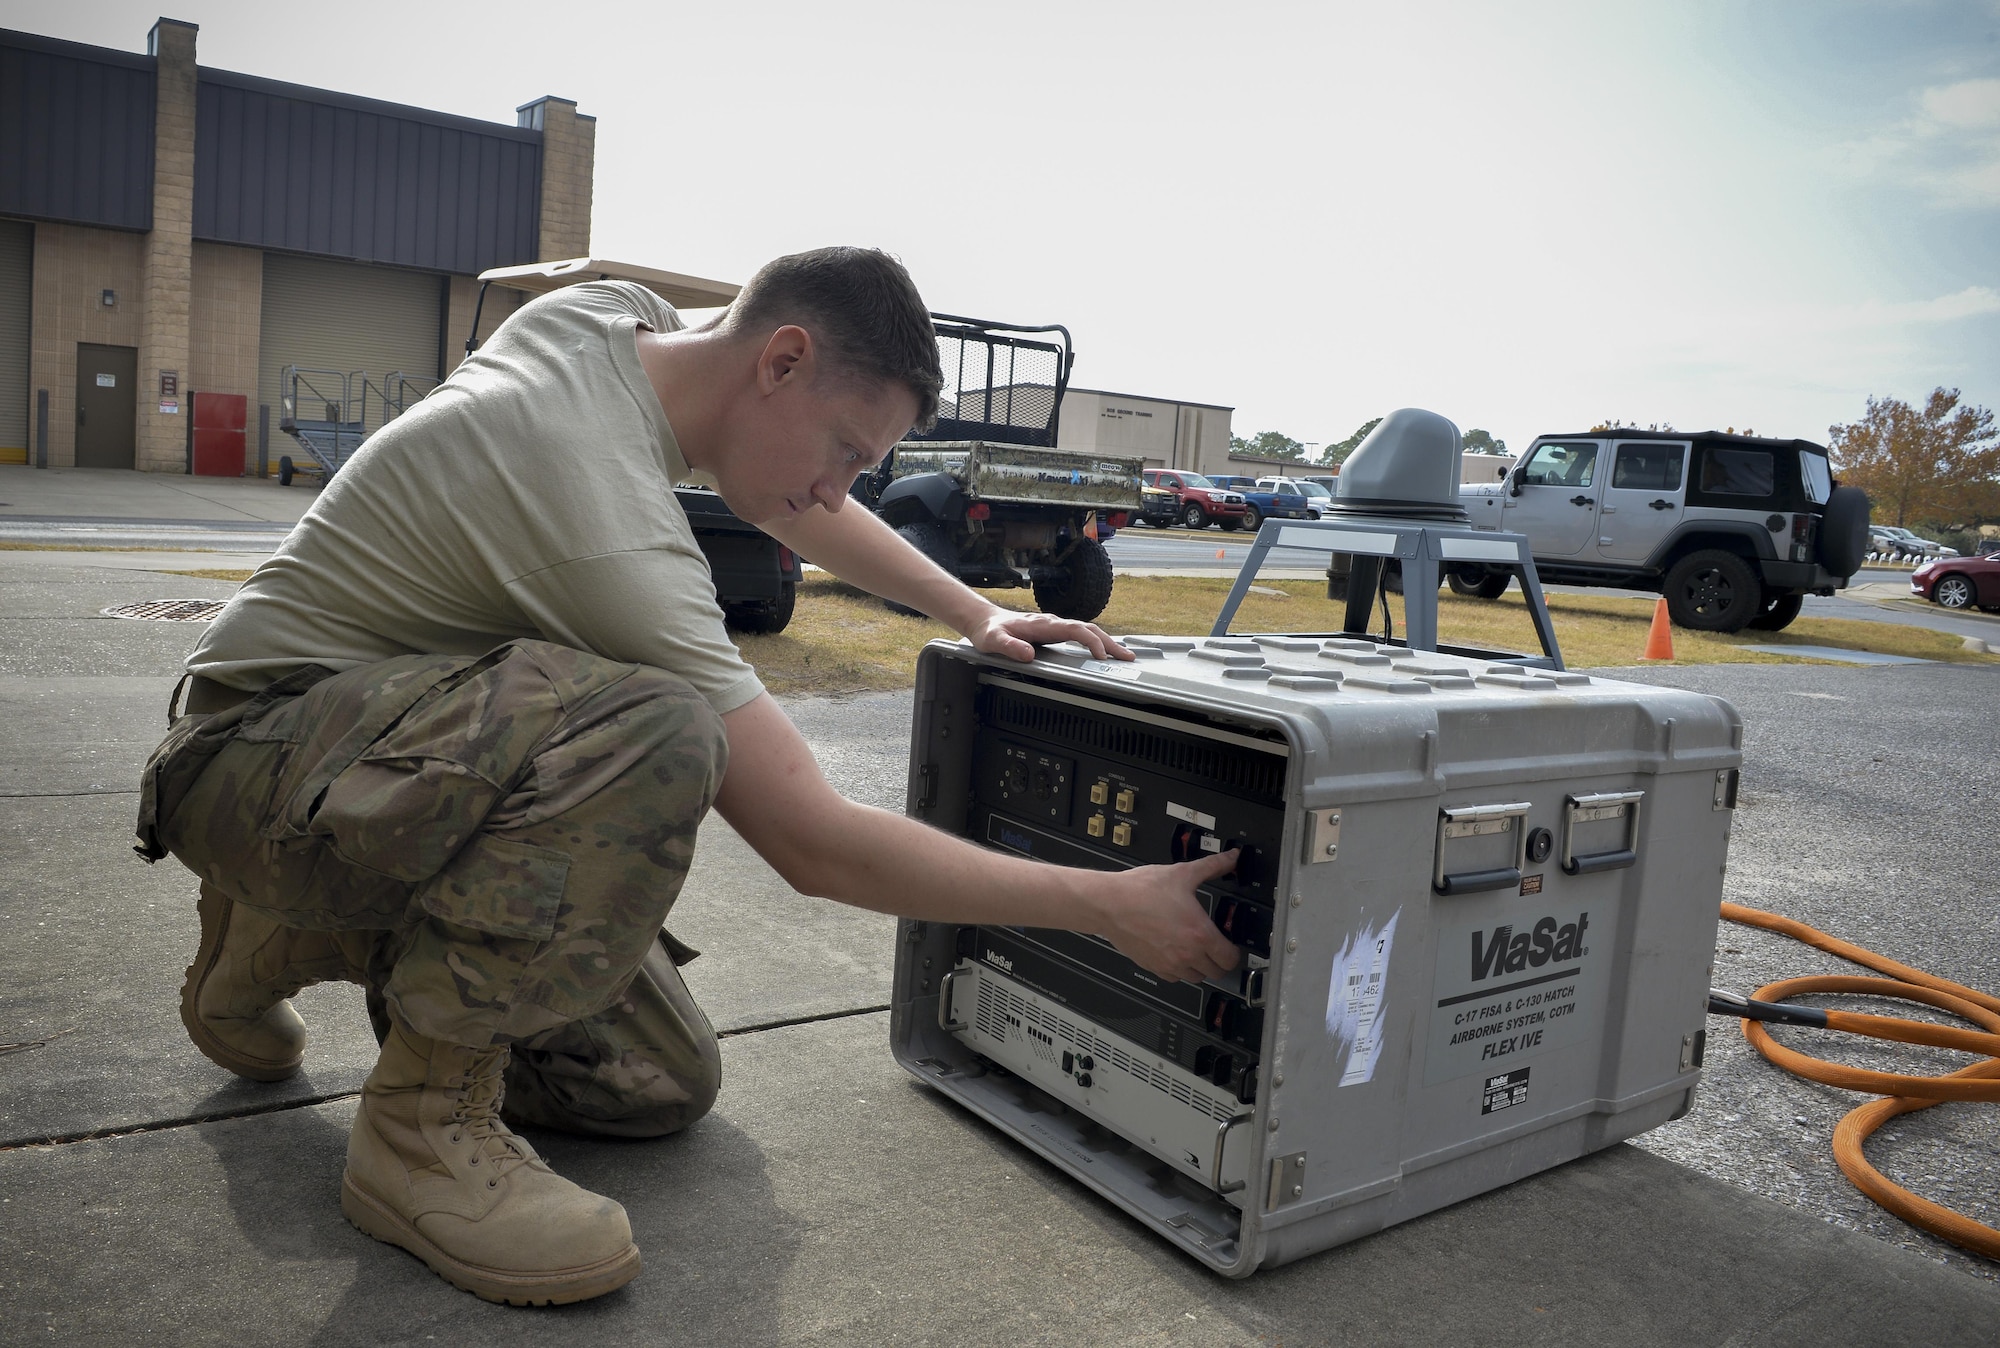 Staff Sgt. Ryan Hart, a radio frequency transmission system supervisor with the 1st Special Operations Communications Squadron, turns on the internal reference unit at Hurlburt Field, Fla., Nov. 29, 2016. The internal reference unit distributes power to an assembly of modems and routers that control the antenna and log collected data. The KuSS Antenna is an airborne broadband satellite communication system that transmits data, such as full motion video that is crucial to real time decision making, from pilots to command and control sites where deployed units are operating. (U.S. Air Force photo by Senior Airman Andrea Posey)